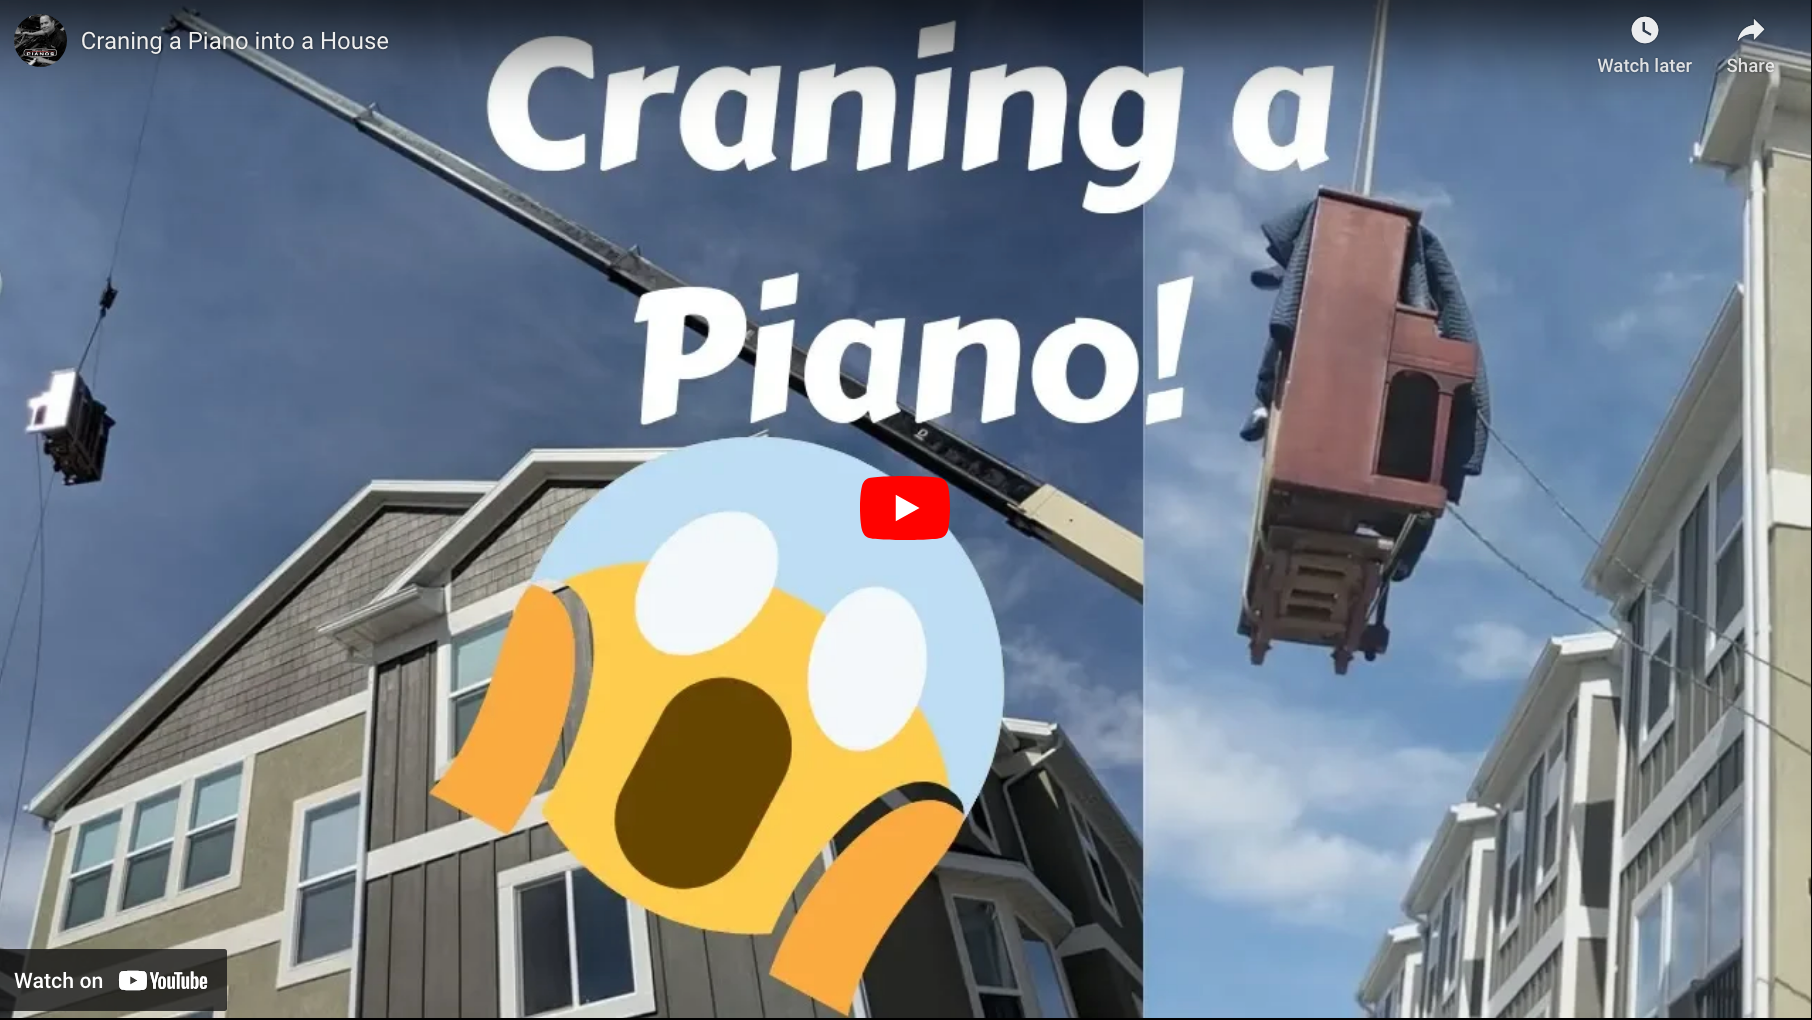 Load video: Moving a piano into a townhome using a crane